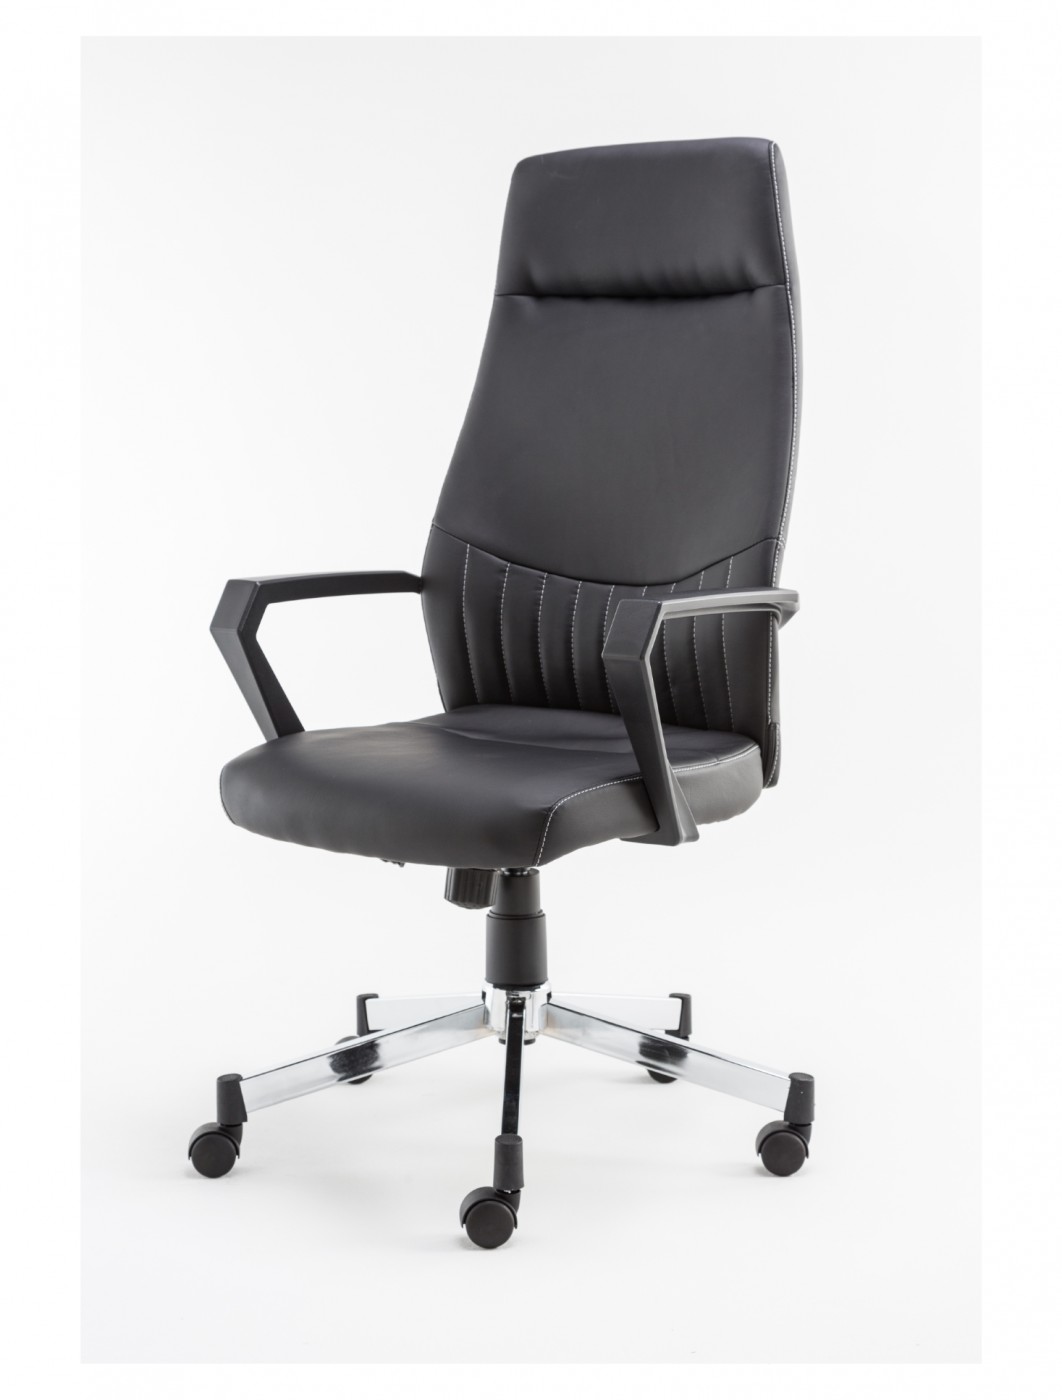 Office Chair Black Brooklyn Faux Leather Chair Aoc3122hb Blk 121 Office Furniture